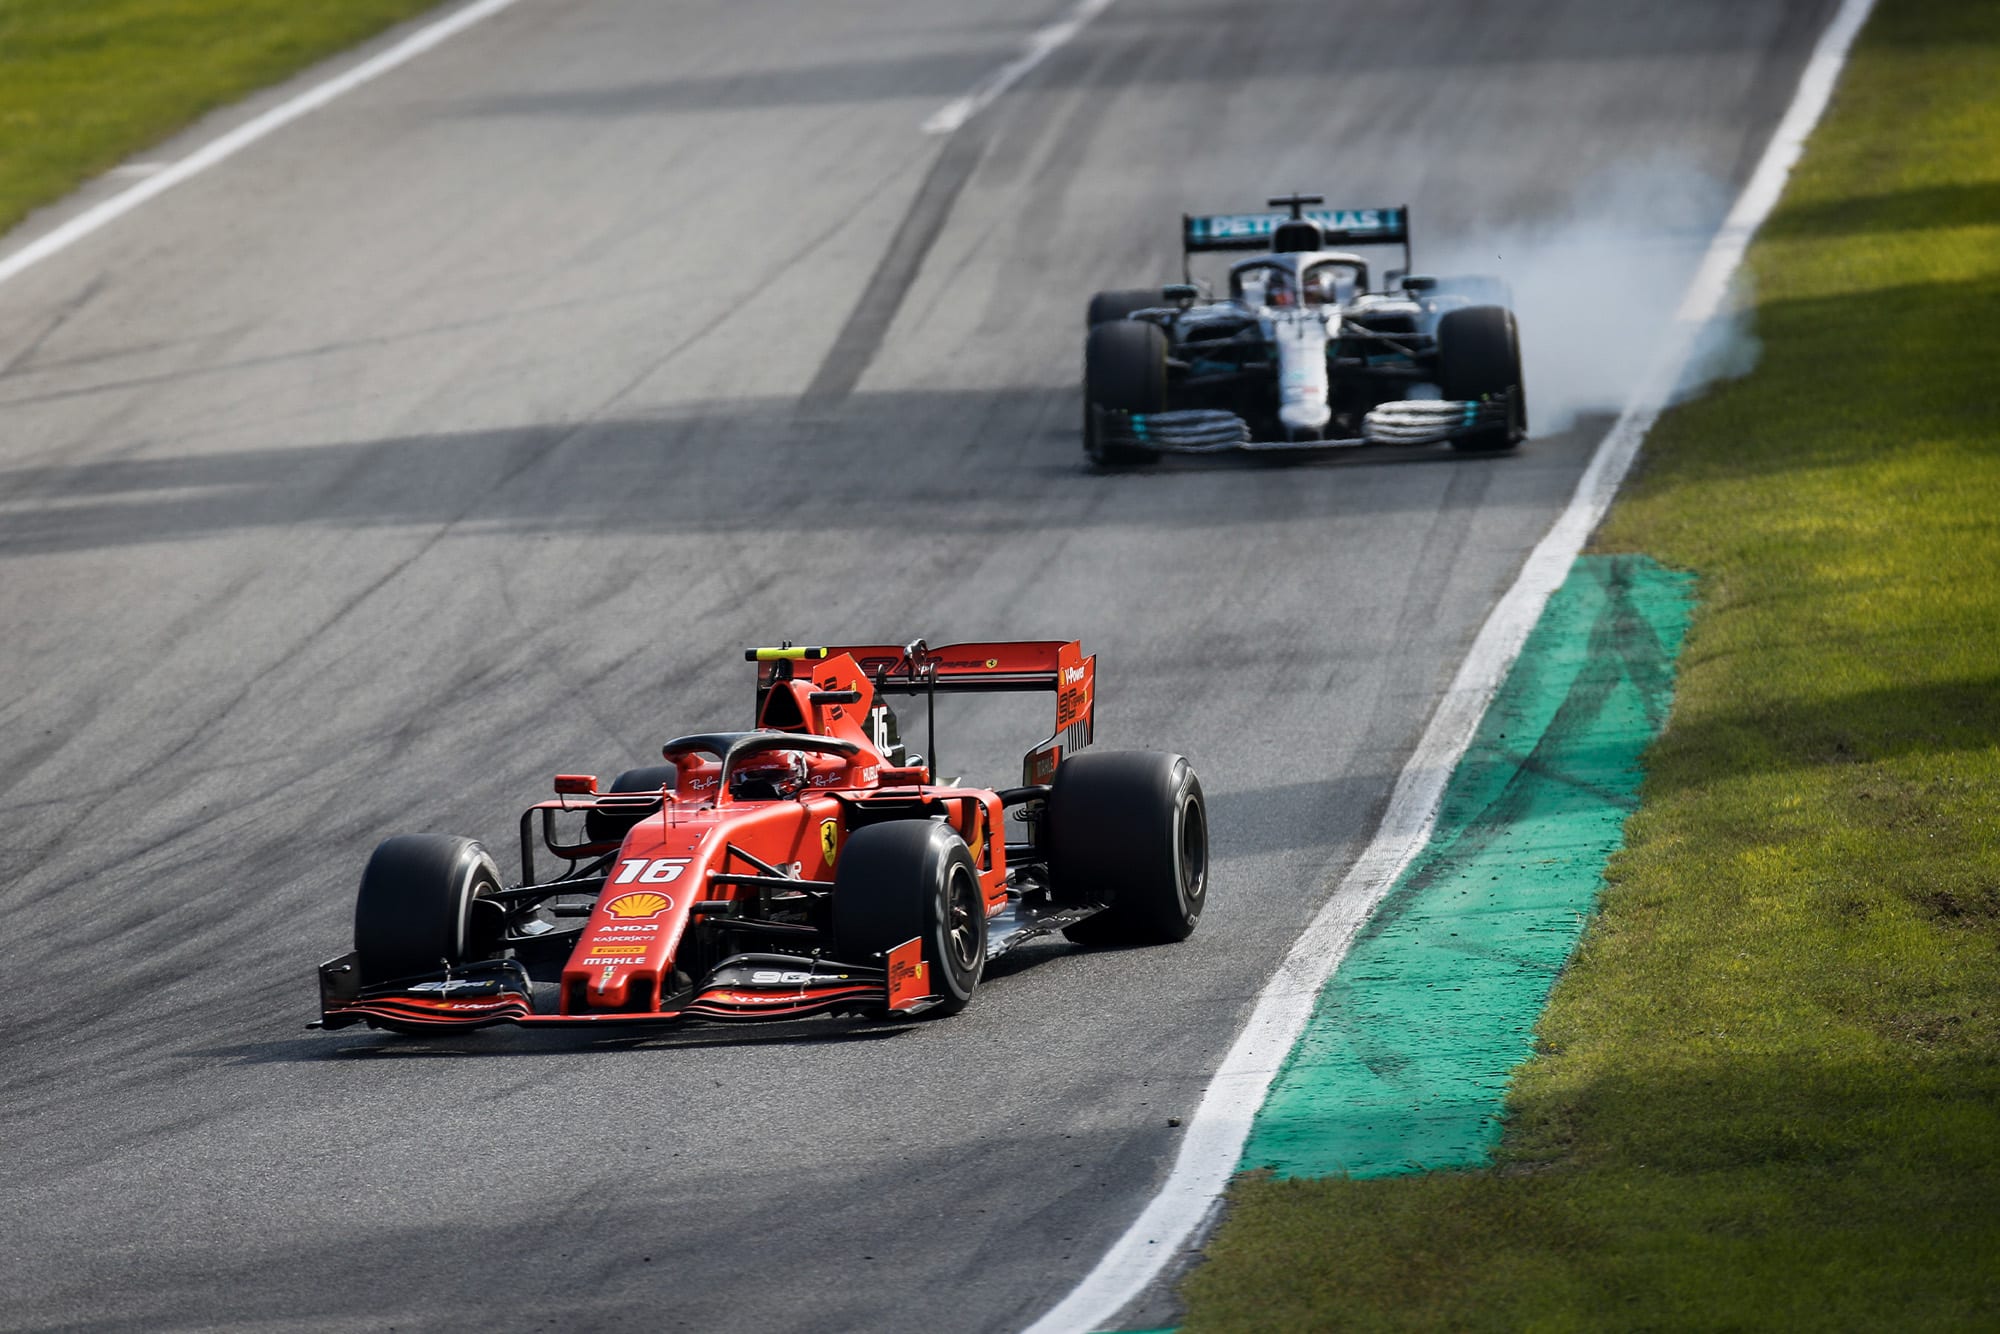 Lewis Hamilton locks up in pursuit of Charles Leclerc during the 2019 Italian Grand Prix